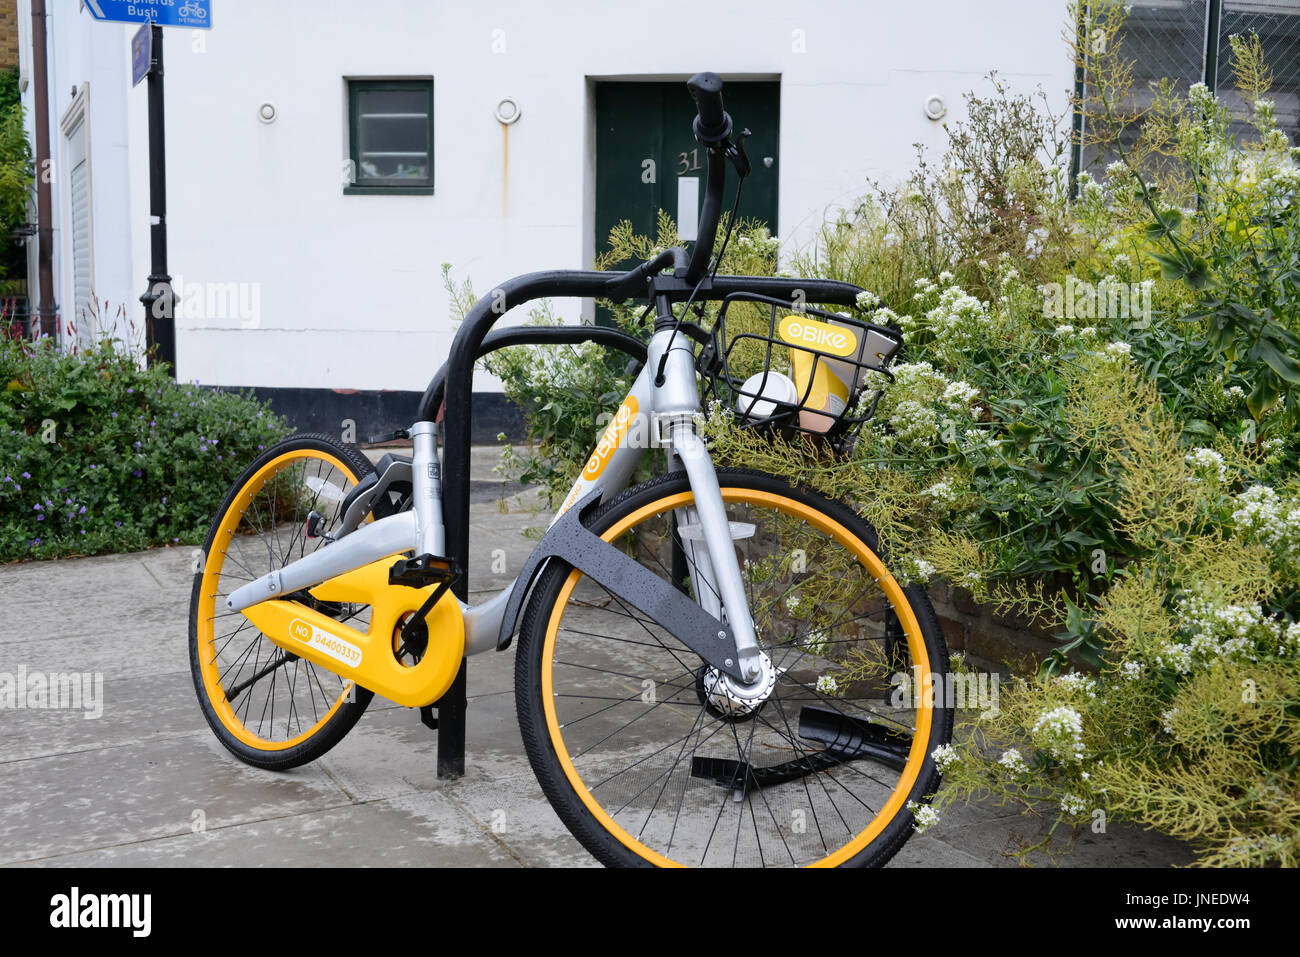 London, UK. 29th July, 2017. A damaged oBike found in Pottery Lane in  London. The bike basket is full of rubbish, the seat is missing, and there  is rubbish in the basket.